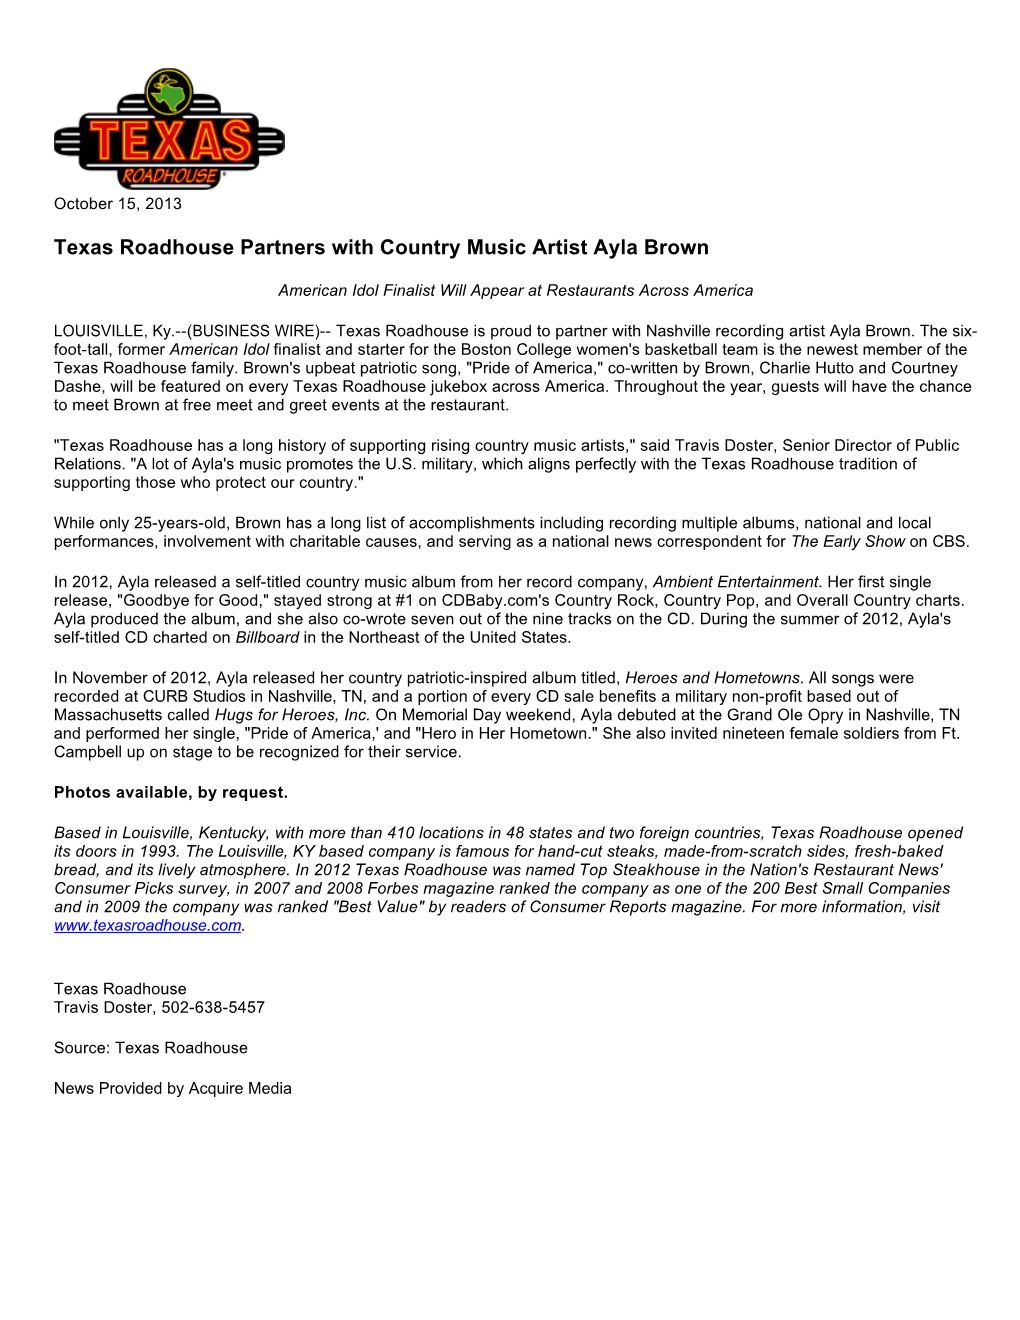 Texas Roadhouse Partners with Country Music Artist Ayla Brown